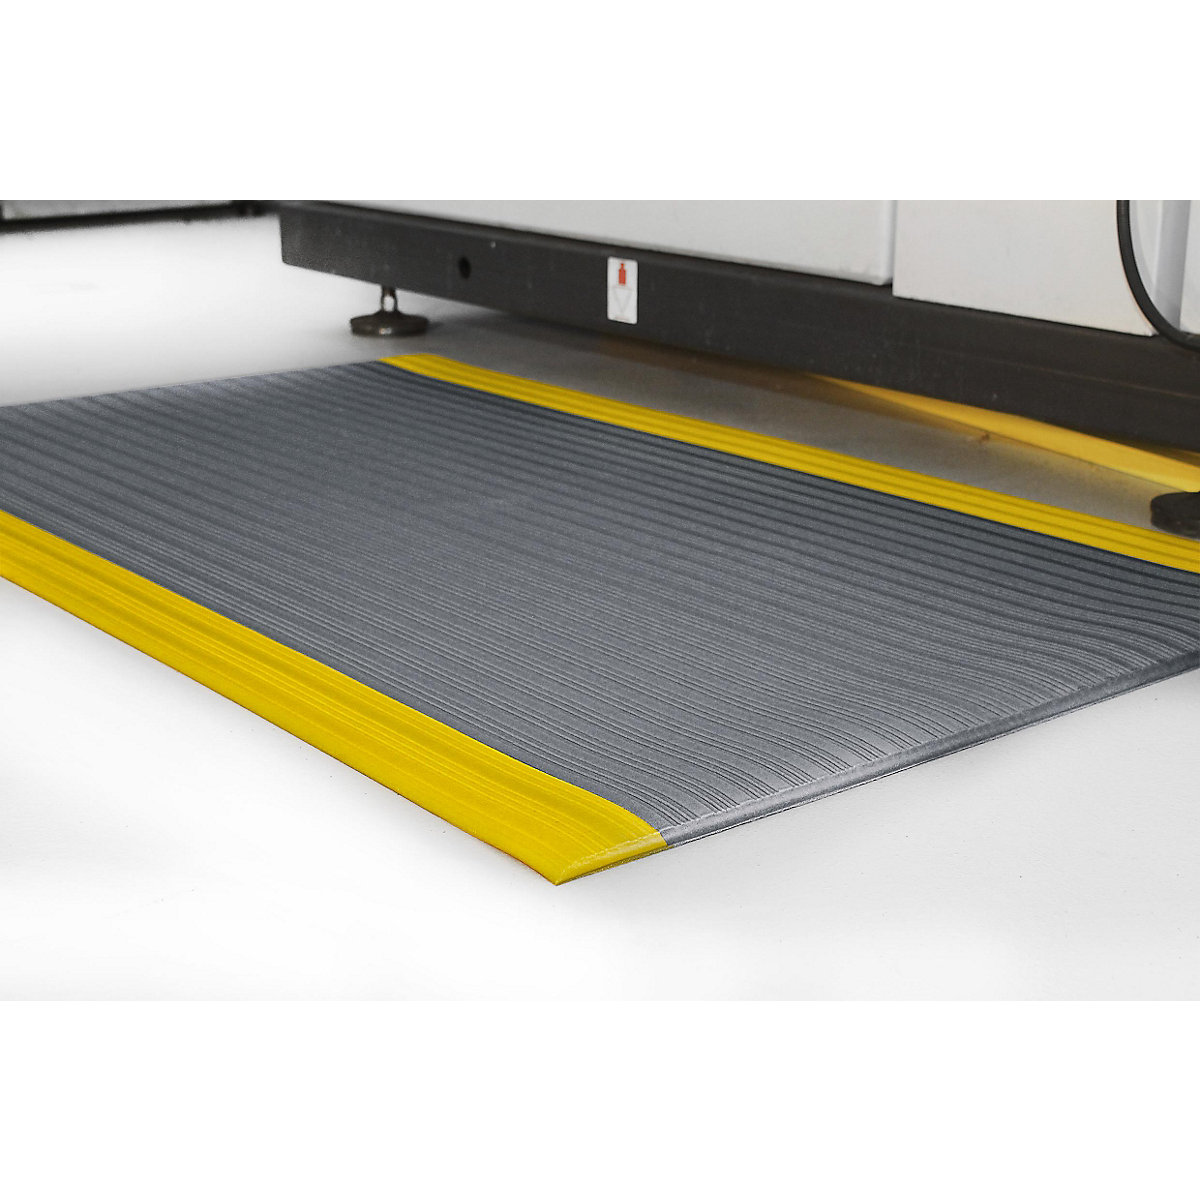 Orthomat® Ribbed anti-fatigue matting, width 1220 mm, per m, grey with high visibility stripes